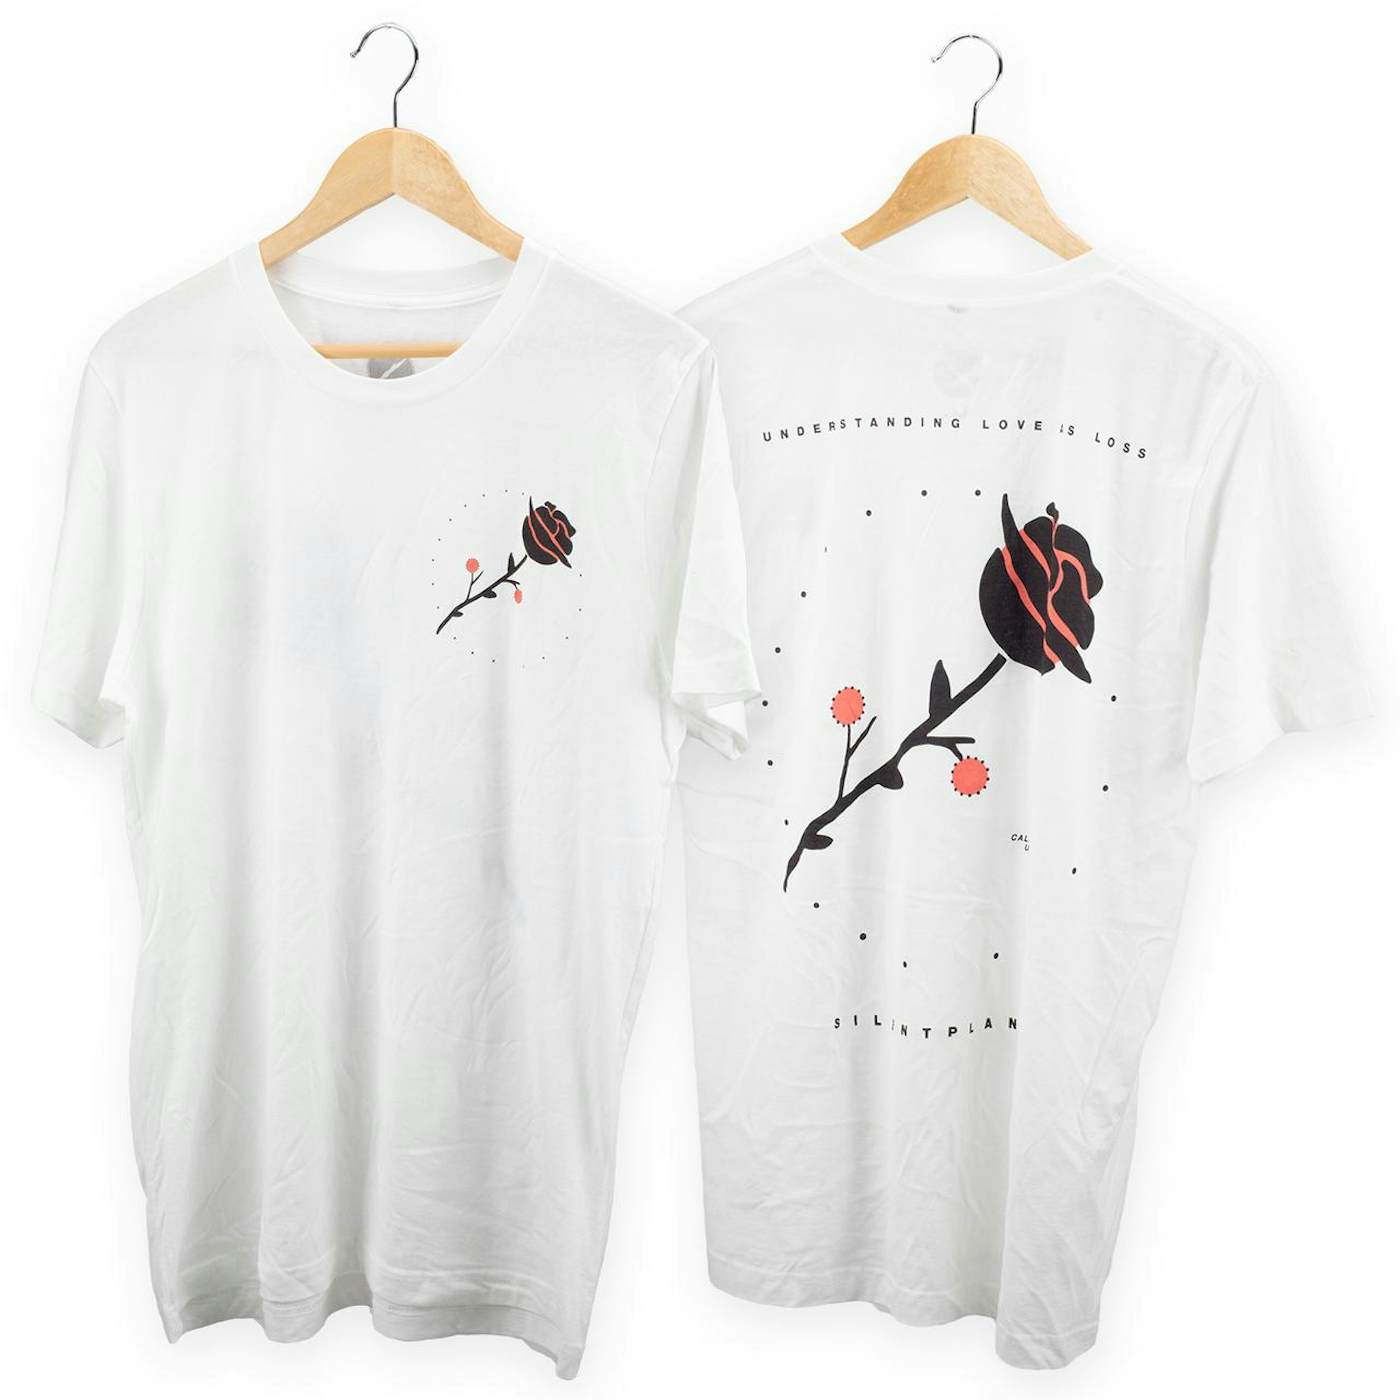 Silent Planet Rose Tee